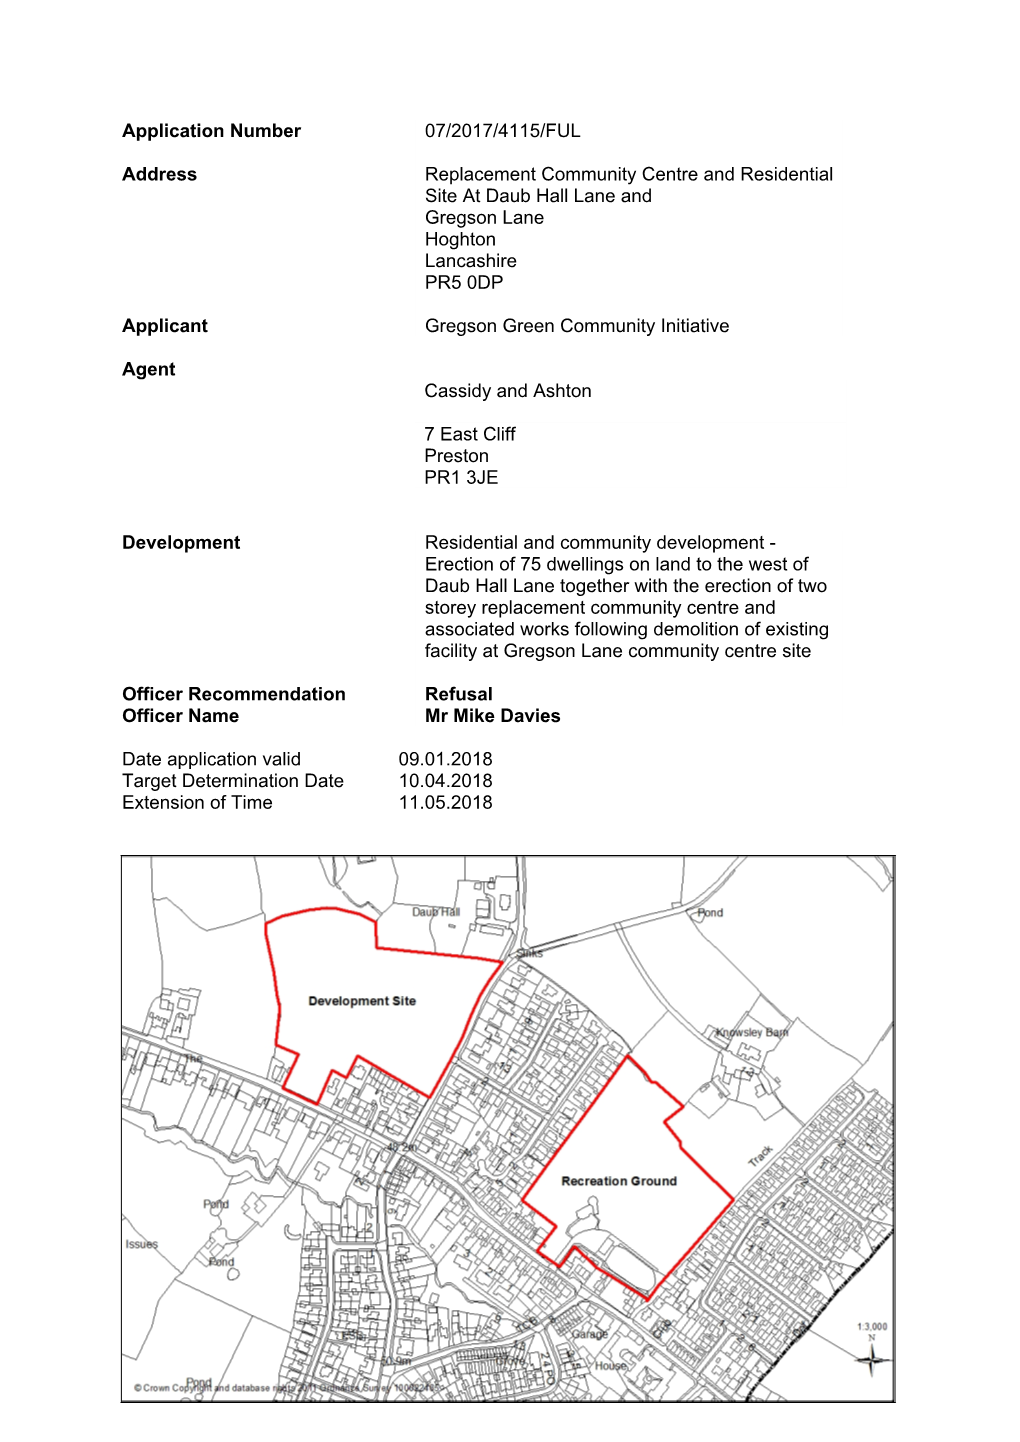 Planning Applications on the Daub Hall Lane Site, Which Has an Historic Agricultural Use